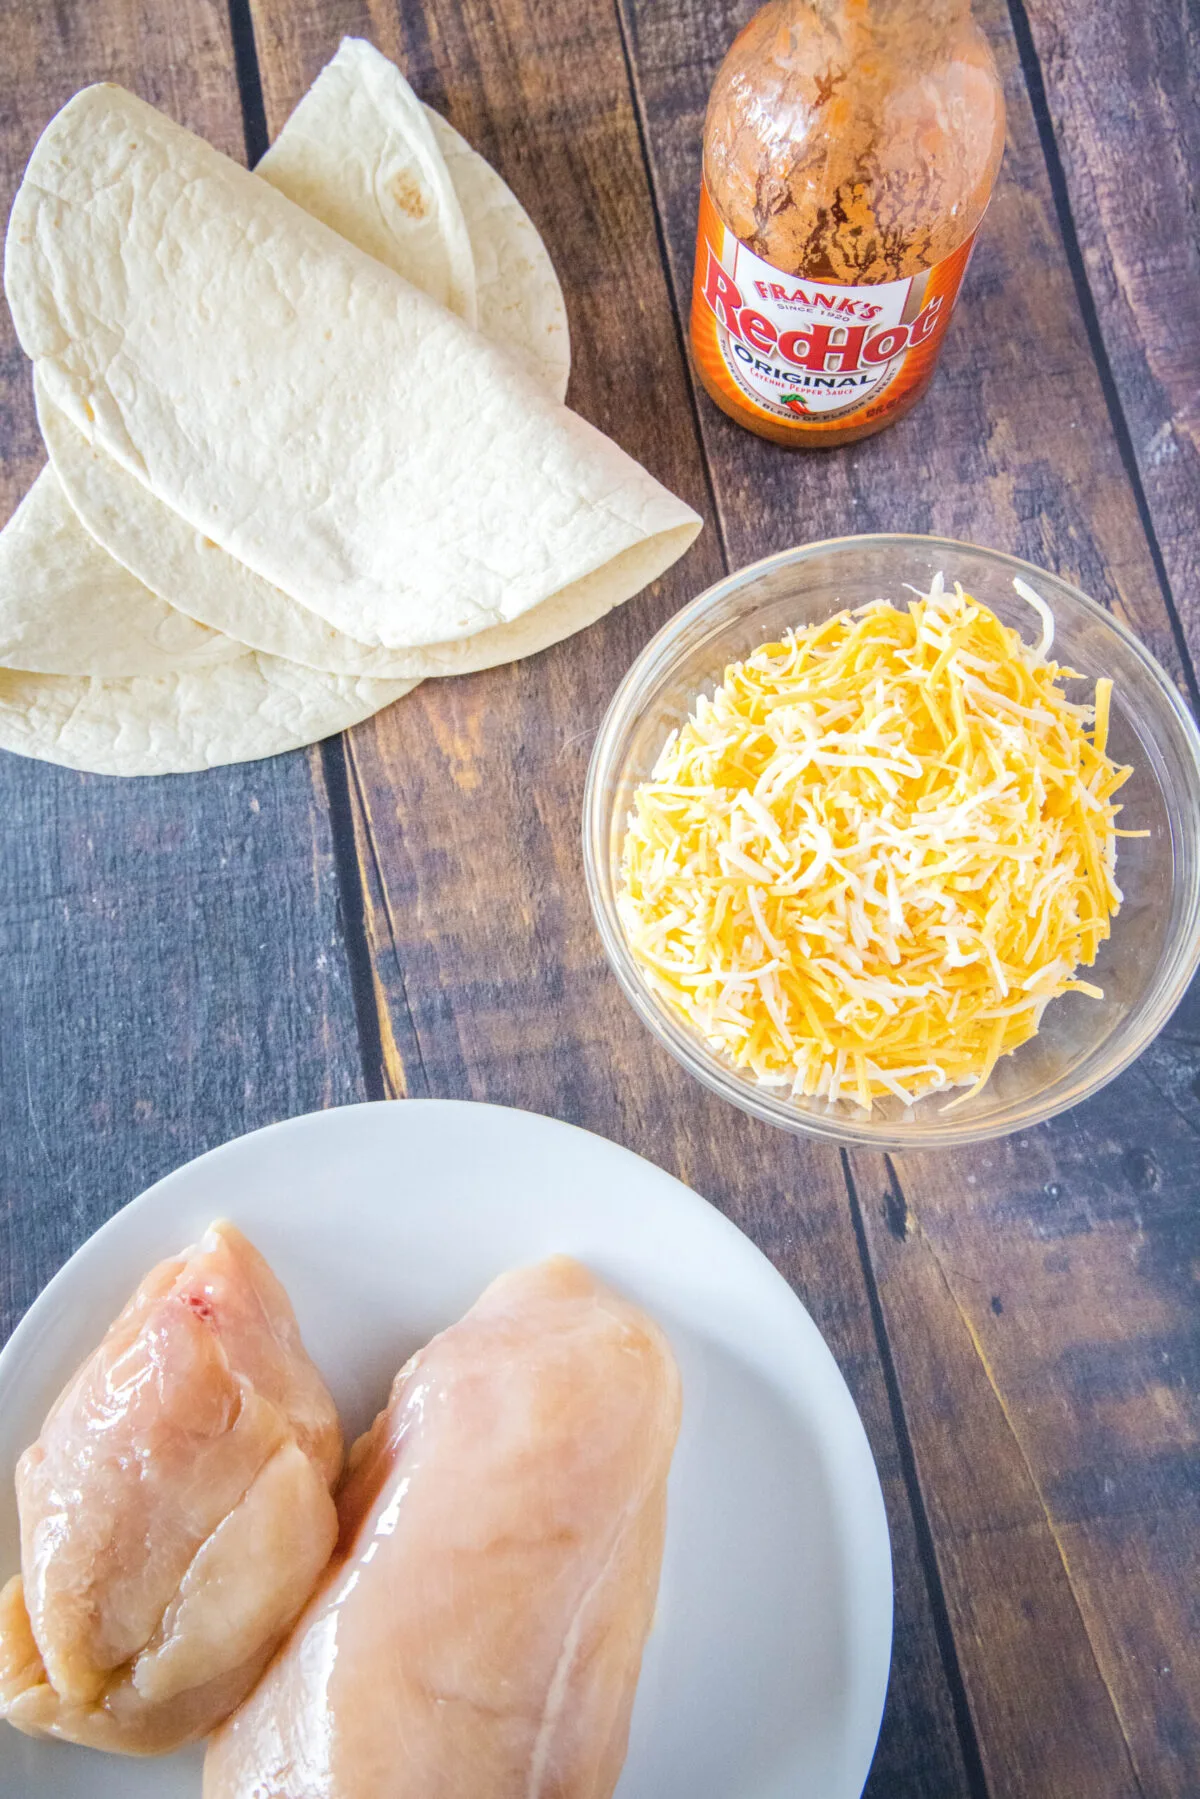 Overhead view of a plate of chicken breasts, a bowl of shredded cheese, a bottle of wing sauce, and two flour tortillas